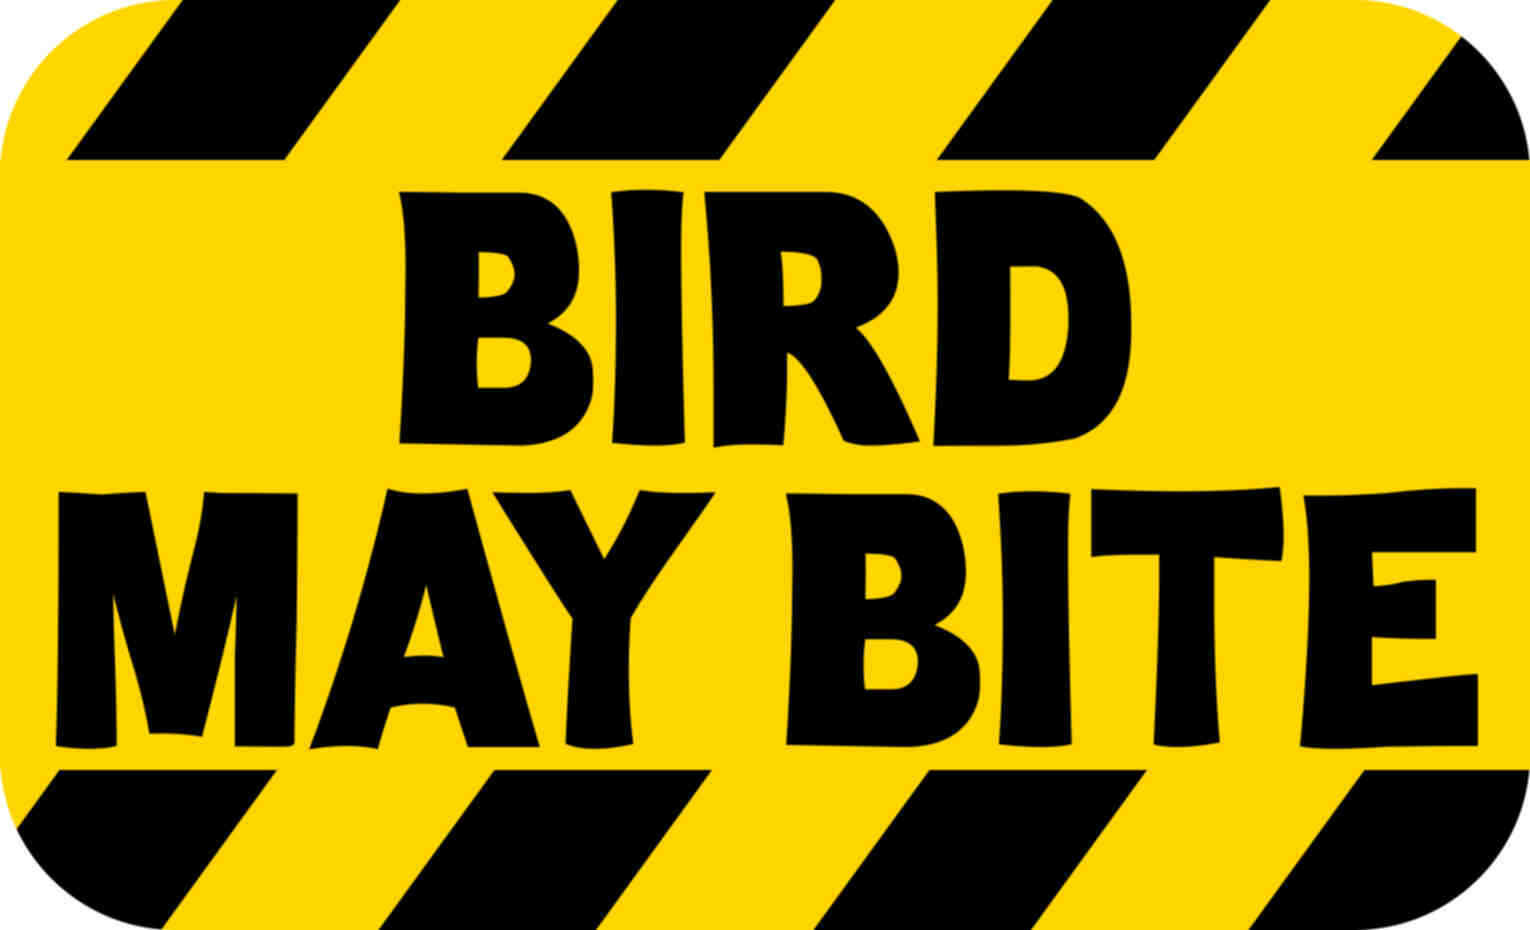 5in×3in Yellow and Black Striped Bird May Bite Magnet Vinyl Sign Magnetic Decal